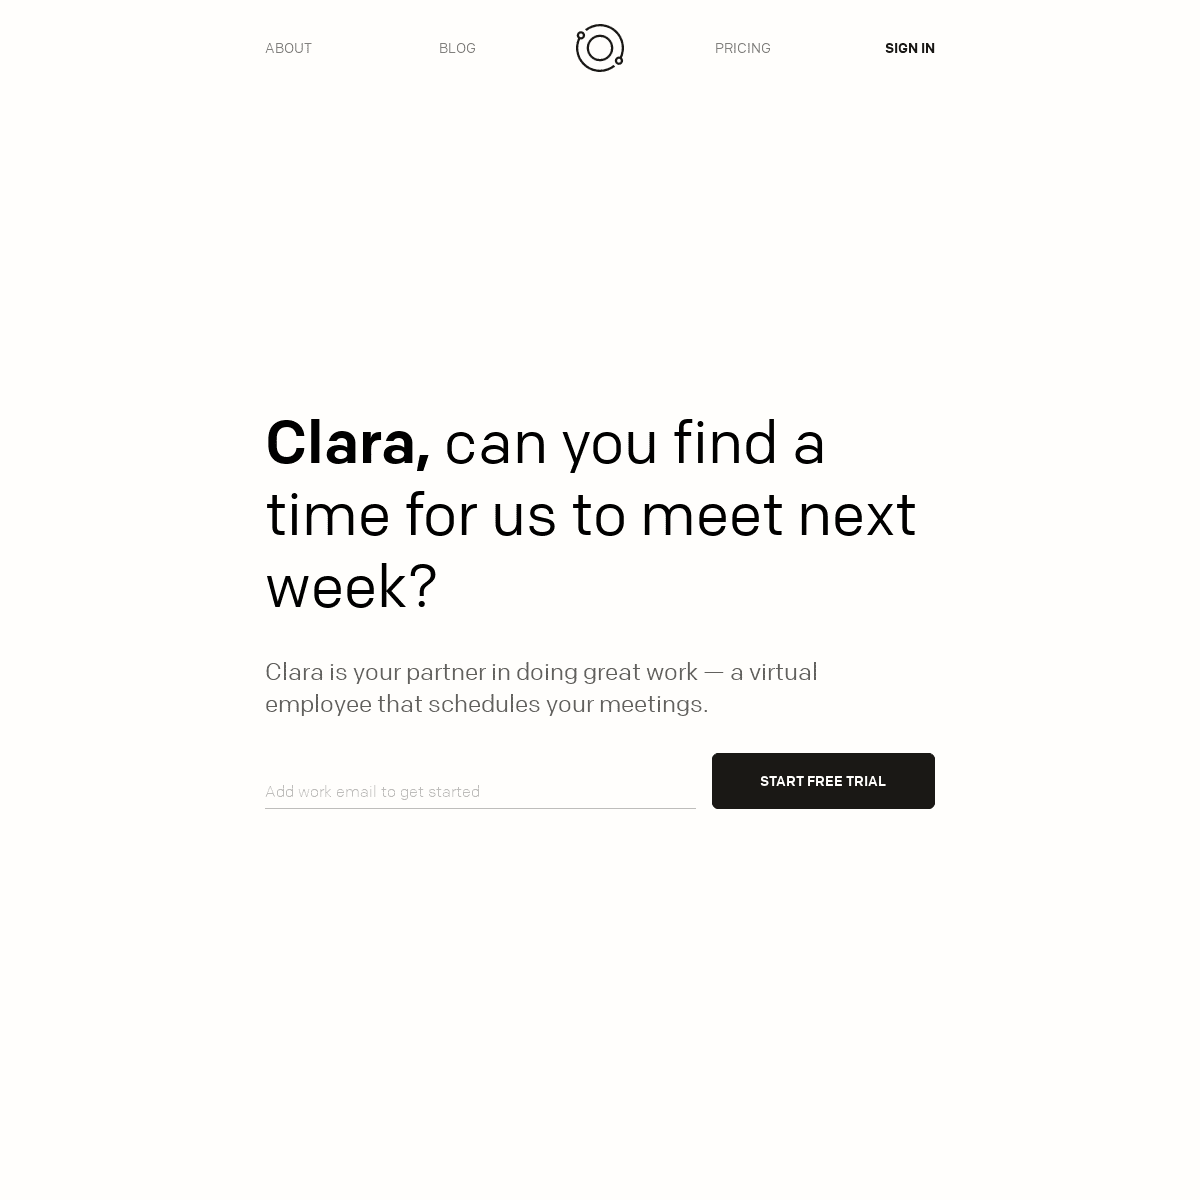 A complete backup of https://claralabs.com